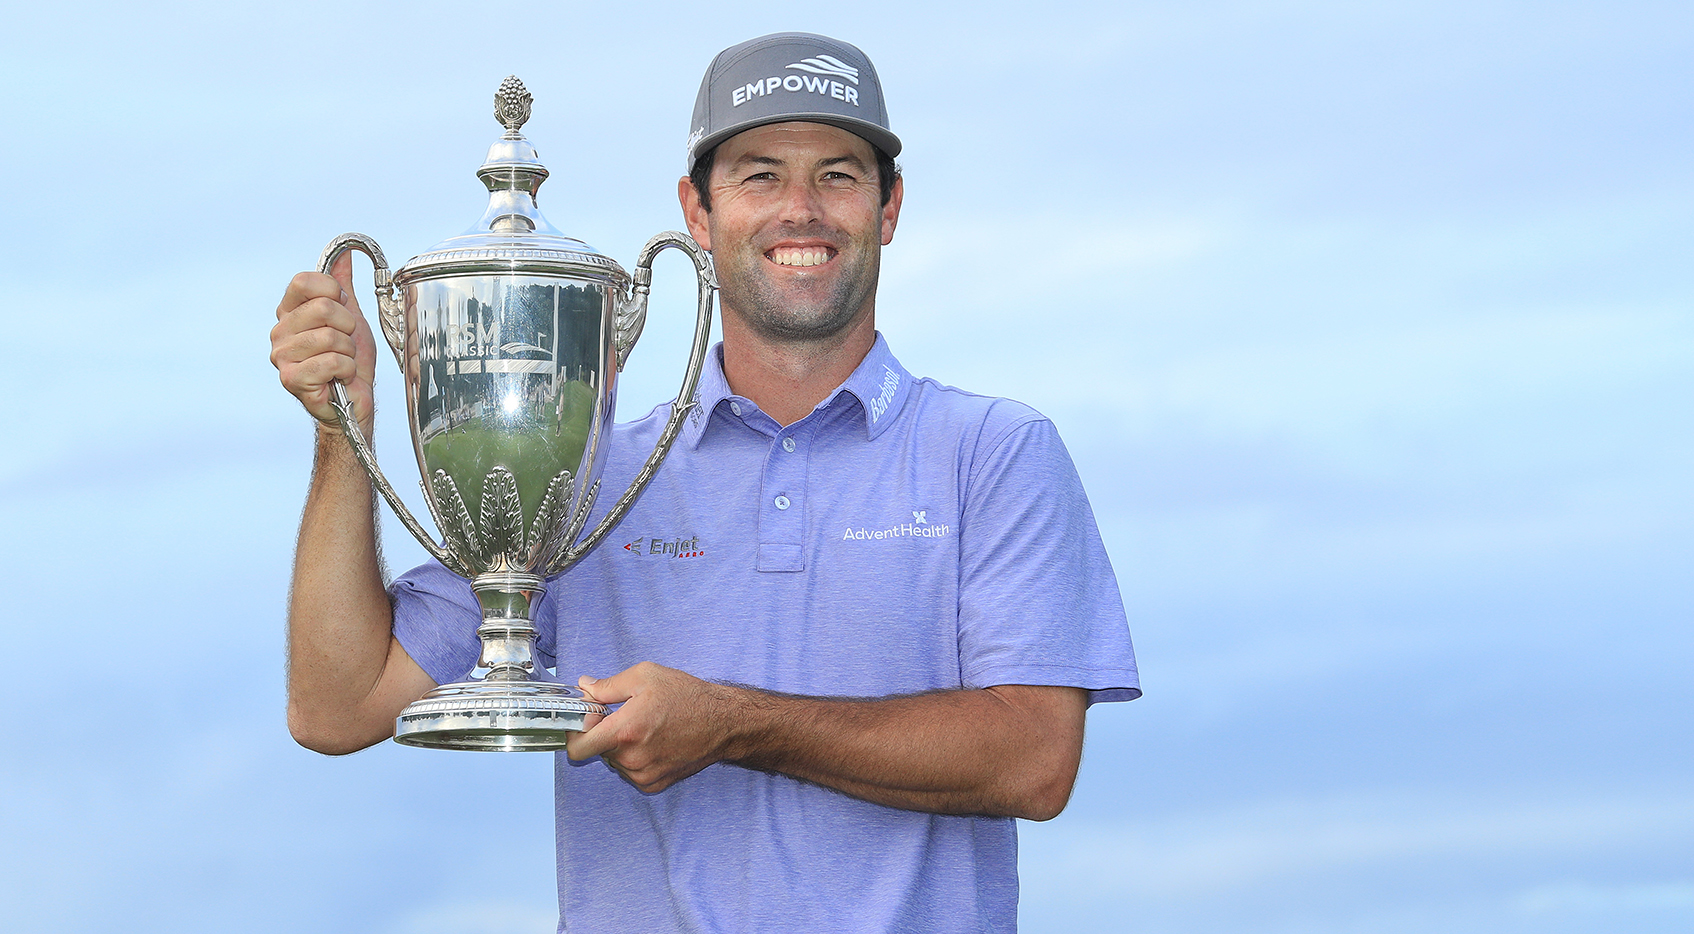 Six years later, Streb wins again at The RSM Classic